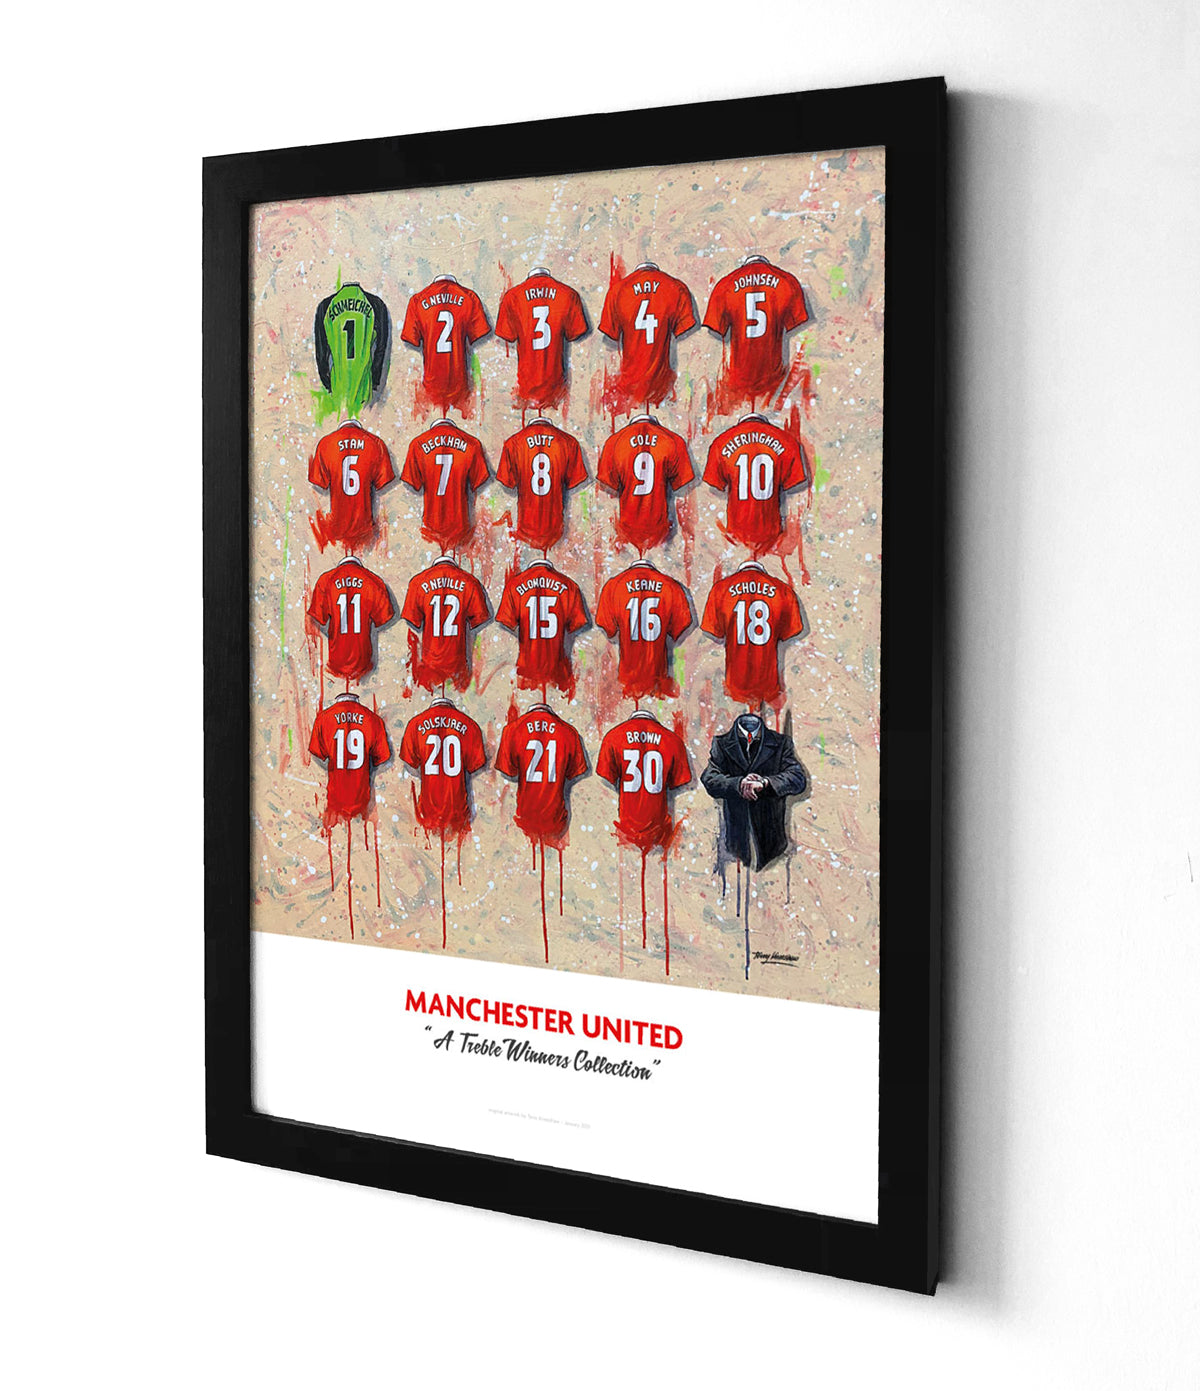 Man United Treble Winners artwork by Terry Kneeshaw, featuring 16 iconic jerseys in an A2 limited edition print, could be  A collage of 16 Man United football jerseys from the team's 1998-1999 treble-winning season, arranged in a grid formation. The jerseys are in varying shades of red and feature different sponsors and designs, including the iconic black and white stripe pattern.